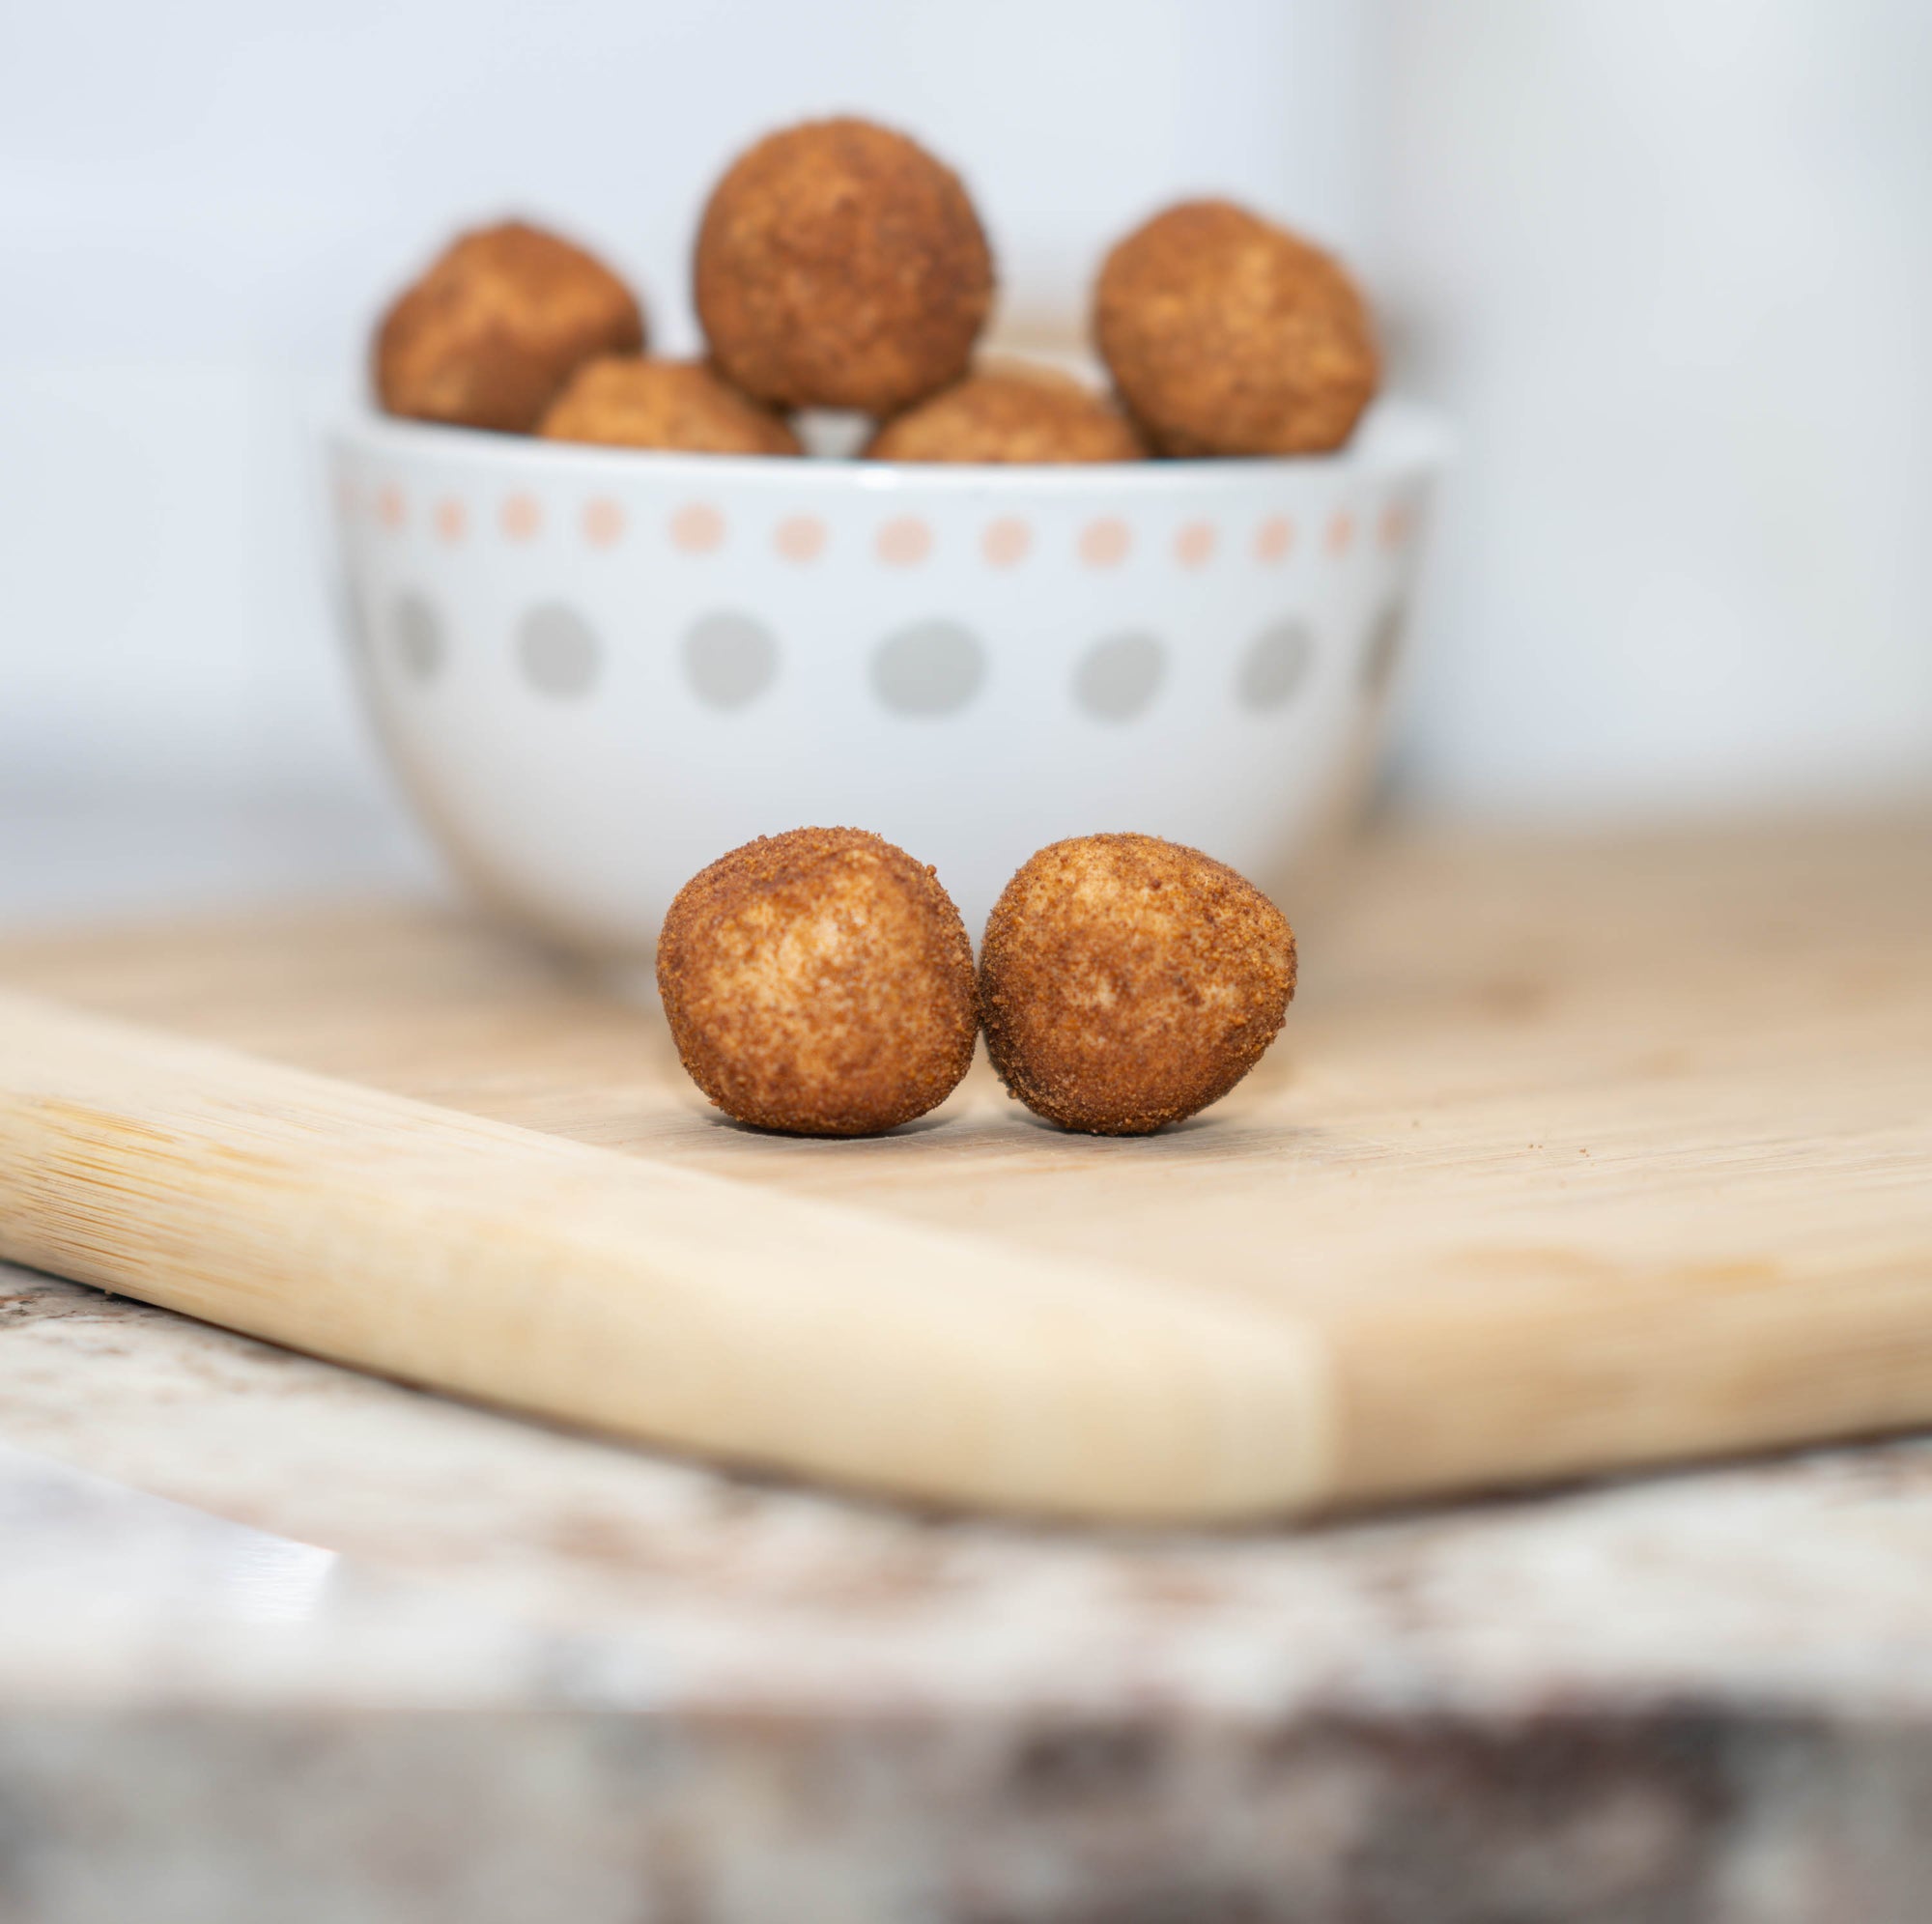 Fiber and Protein Ball Recipe - Our Take on Earthy Andy's Cinnabomb Recipe.